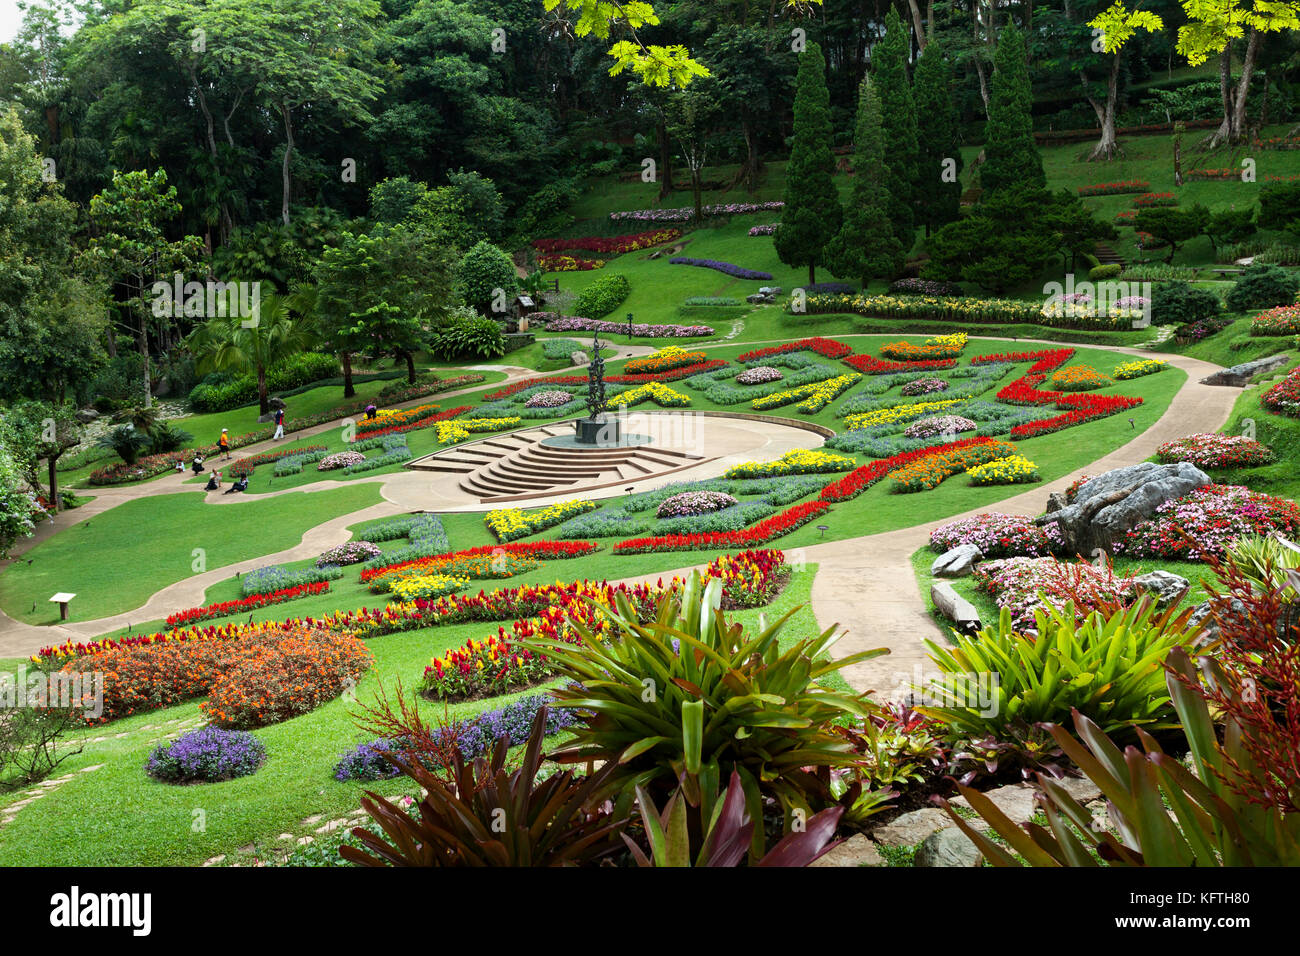 View over the formal garden in the grounds of the Royal Villa at Doi Tung, Northern Thailand. A few people are walking around admiring the plants. Stock Photo